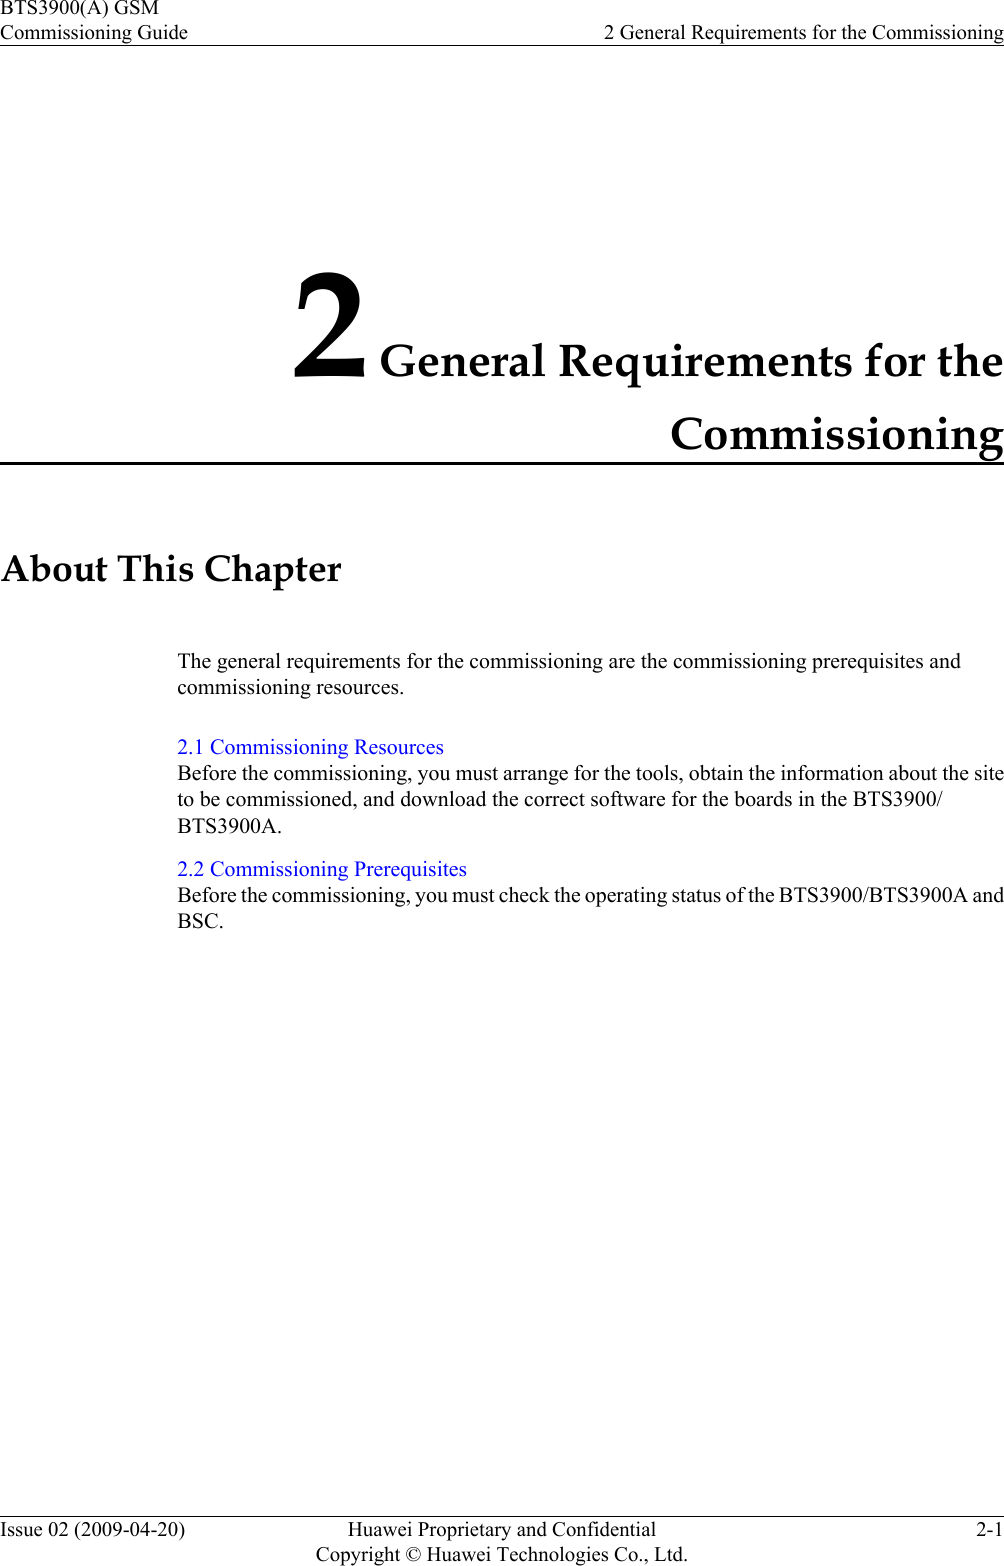 2 General Requirements for theCommissioningAbout This ChapterThe general requirements for the commissioning are the commissioning prerequisites andcommissioning resources.2.1 Commissioning ResourcesBefore the commissioning, you must arrange for the tools, obtain the information about the siteto be commissioned, and download the correct software for the boards in the BTS3900/BTS3900A.2.2 Commissioning PrerequisitesBefore the commissioning, you must check the operating status of the BTS3900/BTS3900A andBSC.BTS3900(A) GSMCommissioning Guide 2 General Requirements for the CommissioningIssue 02 (2009-04-20) Huawei Proprietary and ConfidentialCopyright © Huawei Technologies Co., Ltd.2-1